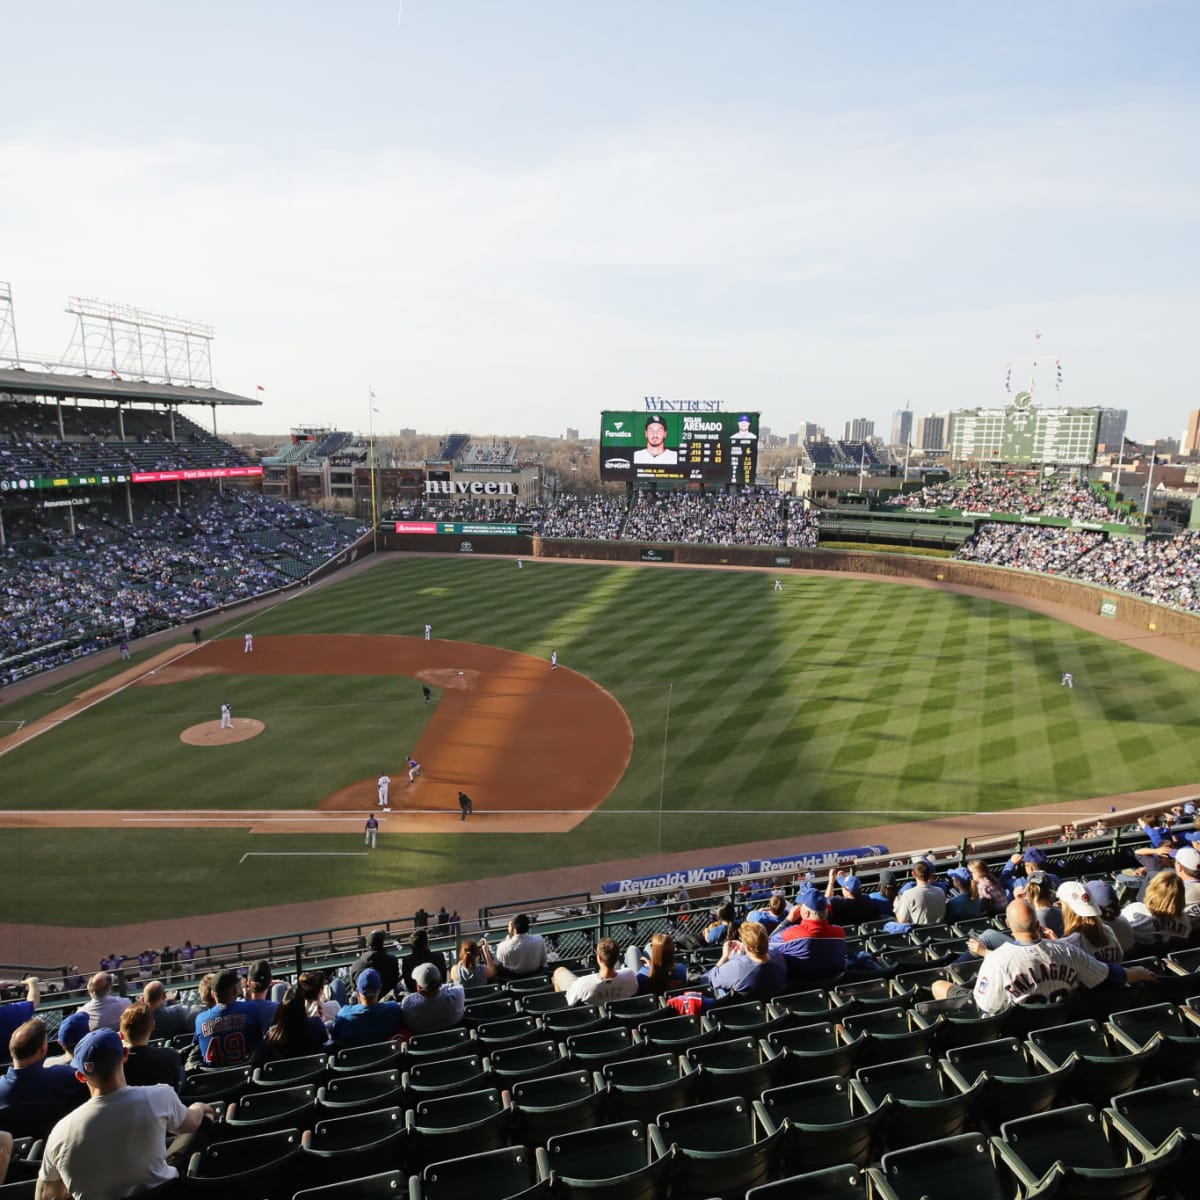 Big 10 Announces 2020 Football Game At Wrigley Field - The Spun: What's  Trending In The Sports World Today